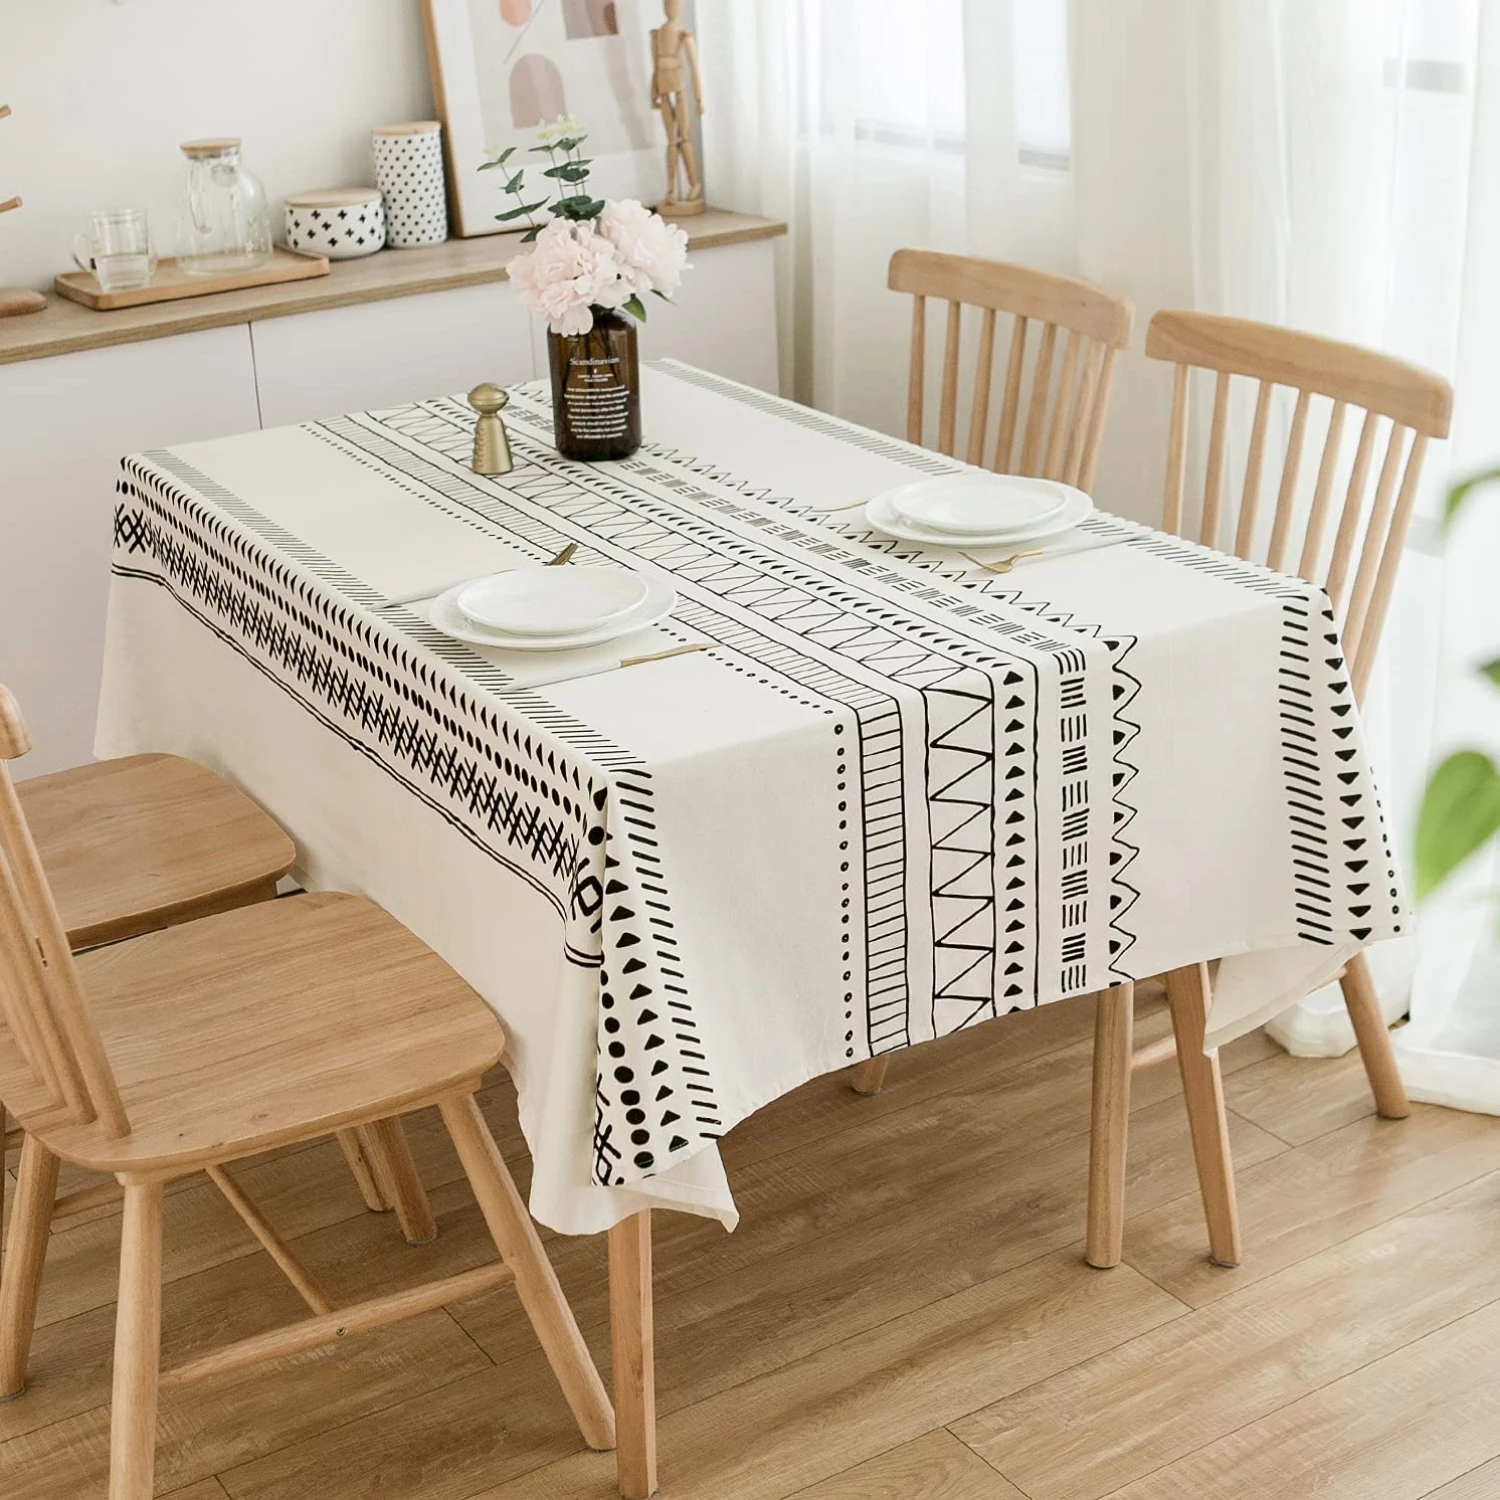 

White Black Waterproof Polyester Tablecloths Boho Farmhouse Table Cover Geometric Striped Tablecloth Holiday Party Decoration